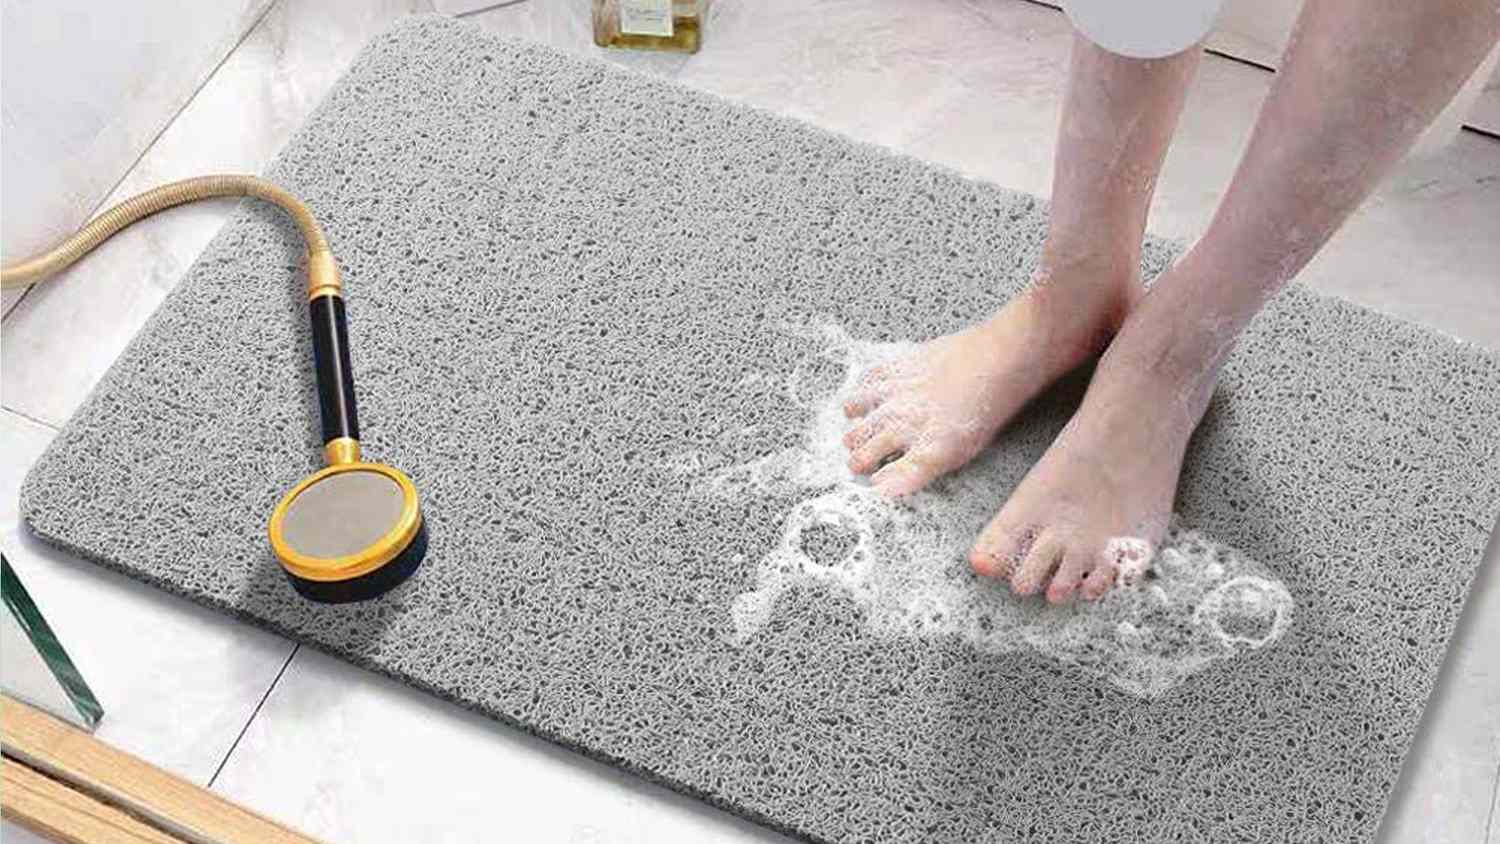 The No-Slip Bath Mat Thousands of Amazon Shoppers Swear by Is on Sale